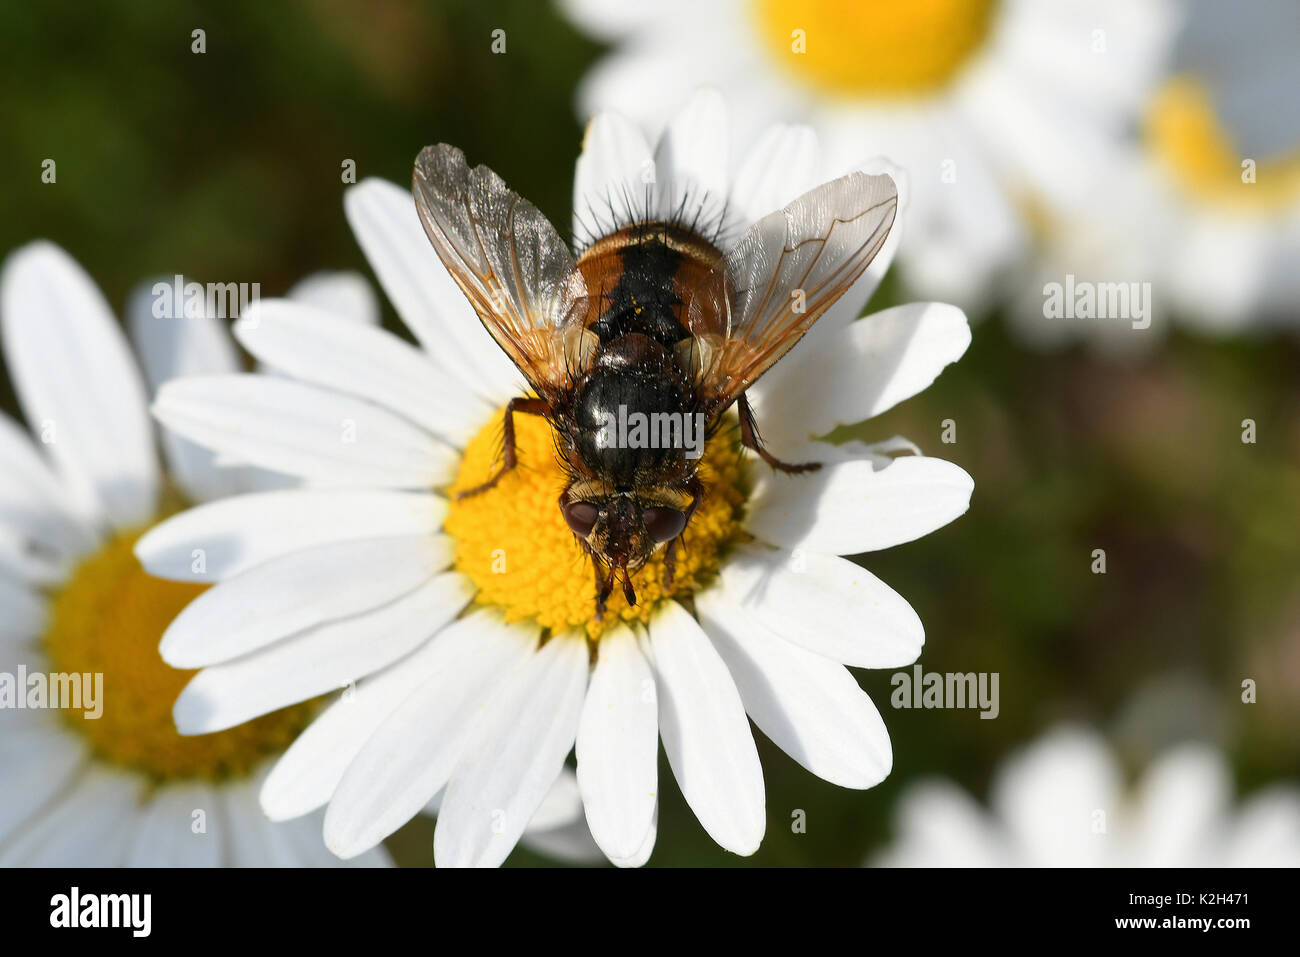 Parasitic Fly (Ectophasia crassipennis) on a white blossom Stock Photo